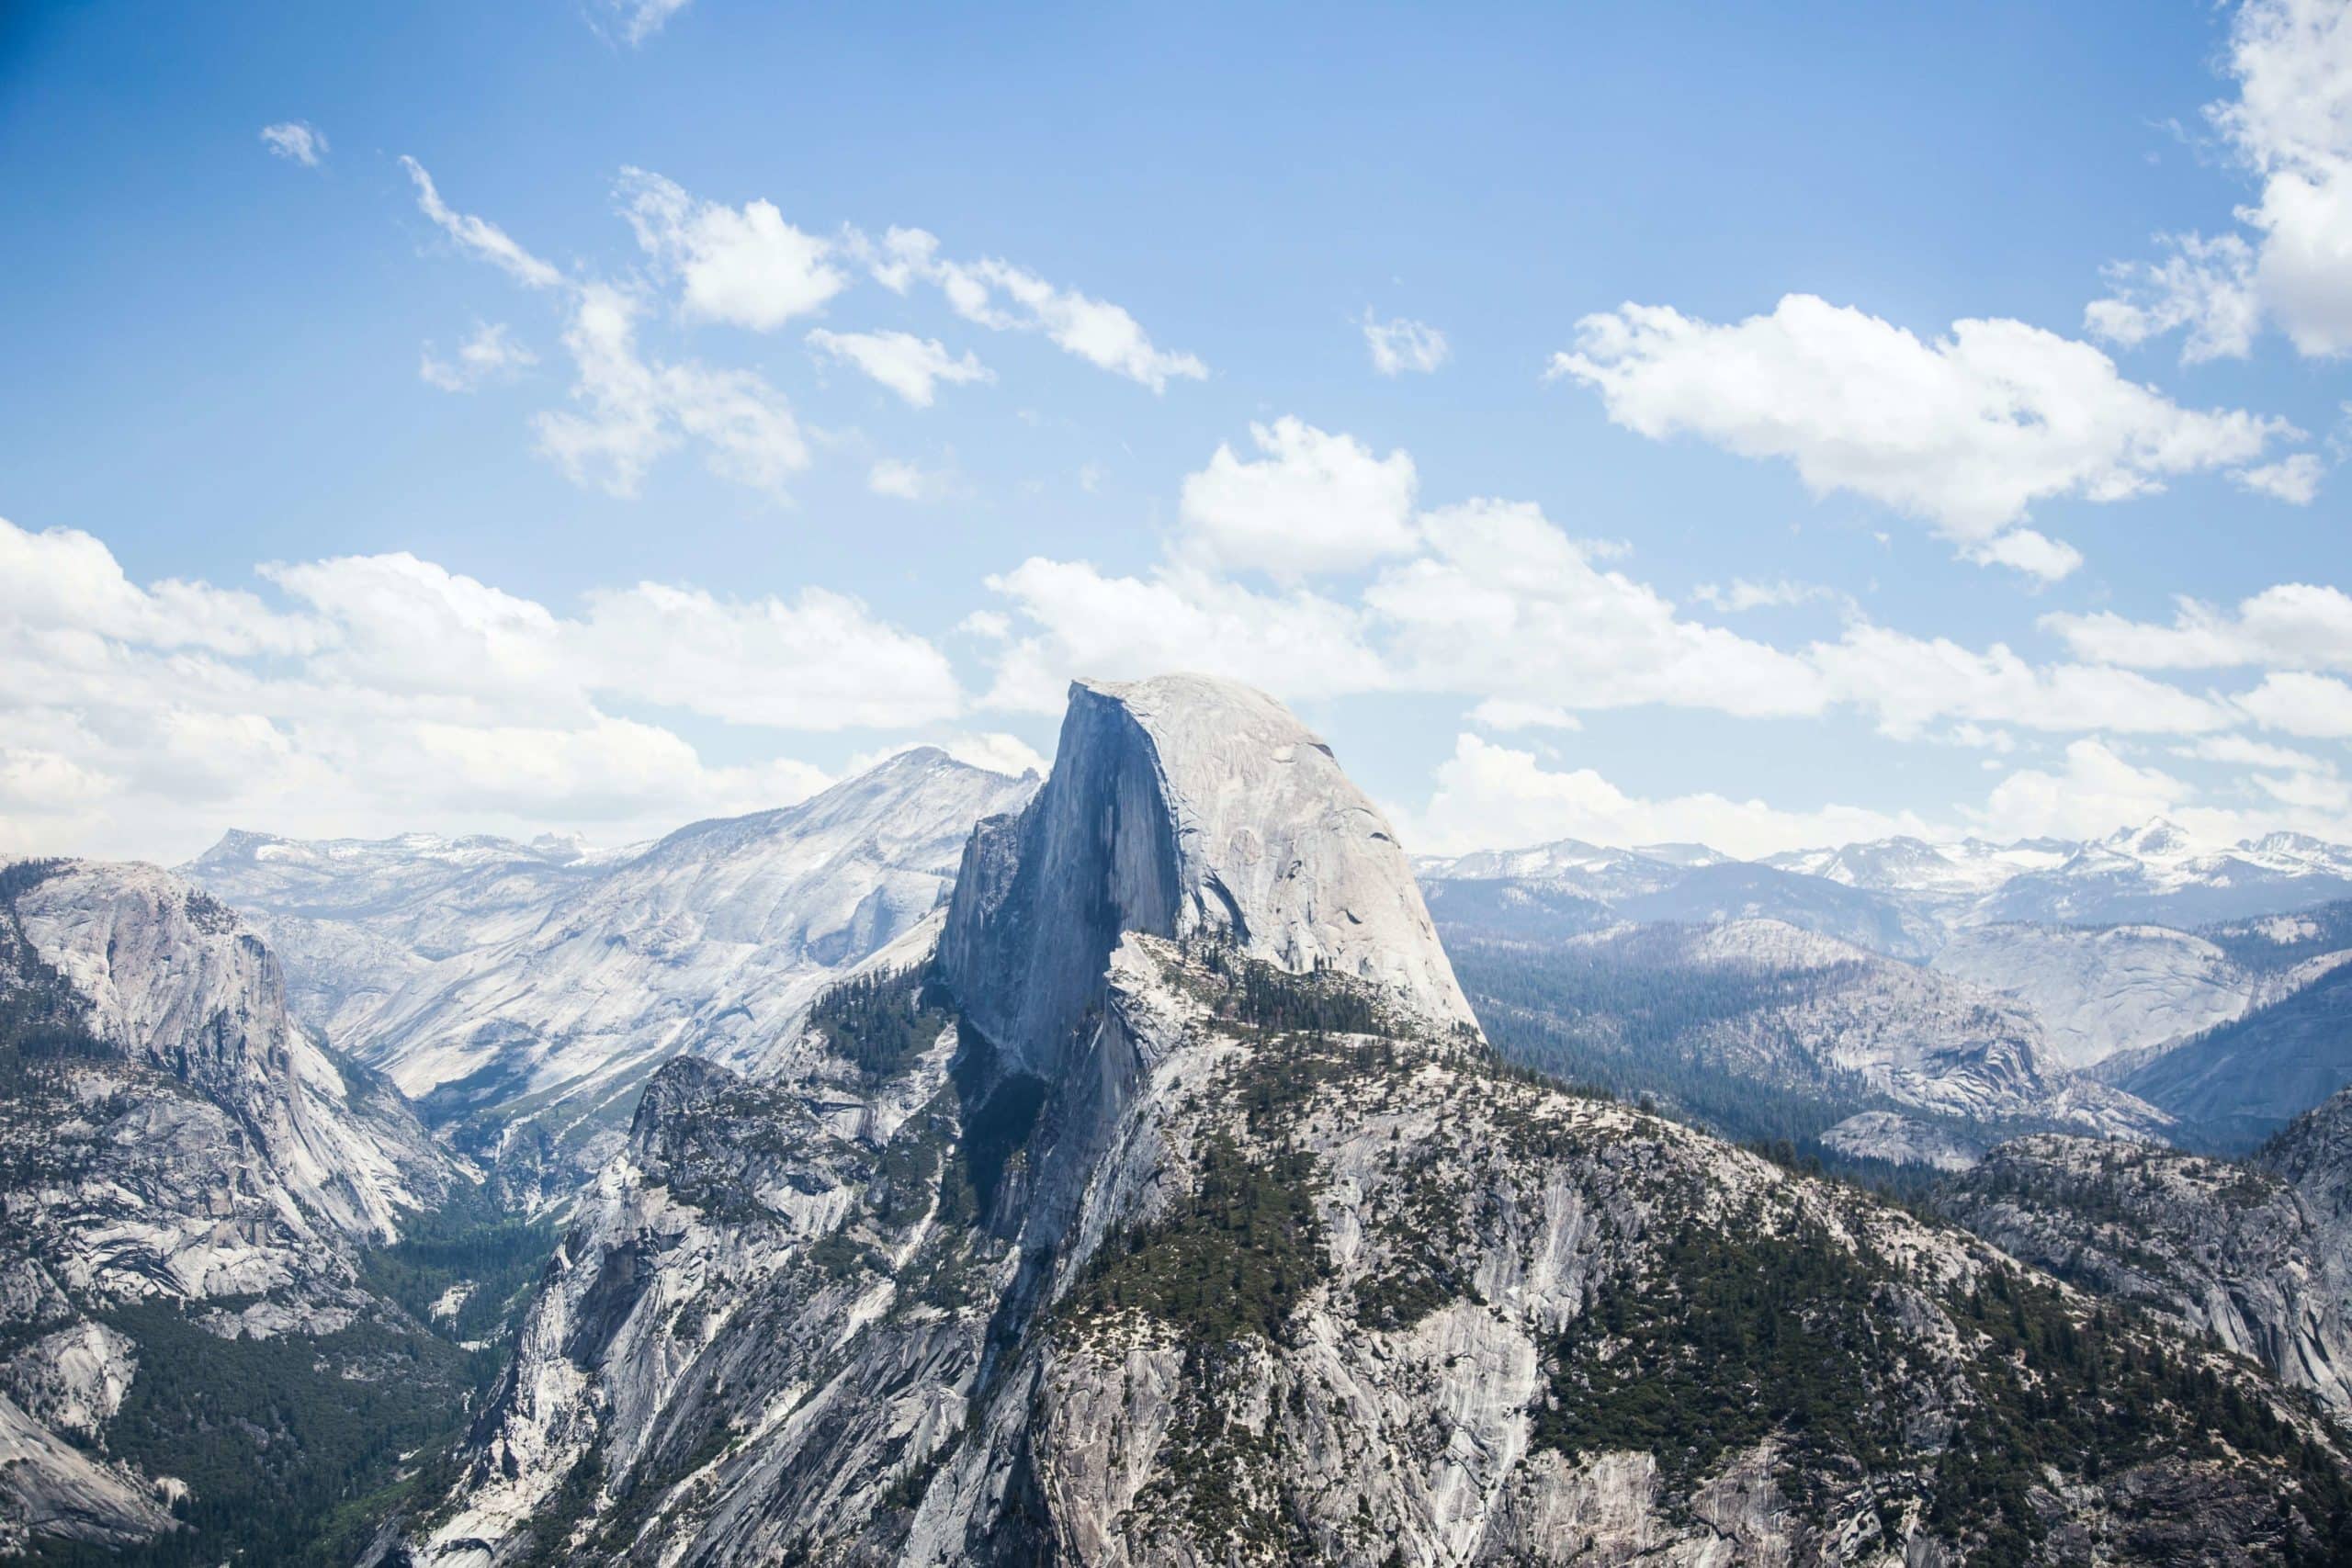 Travel bloggers reveal their most unforgettable travel experiences - Hiking to the Top of Half Dome in Yosemite National Park